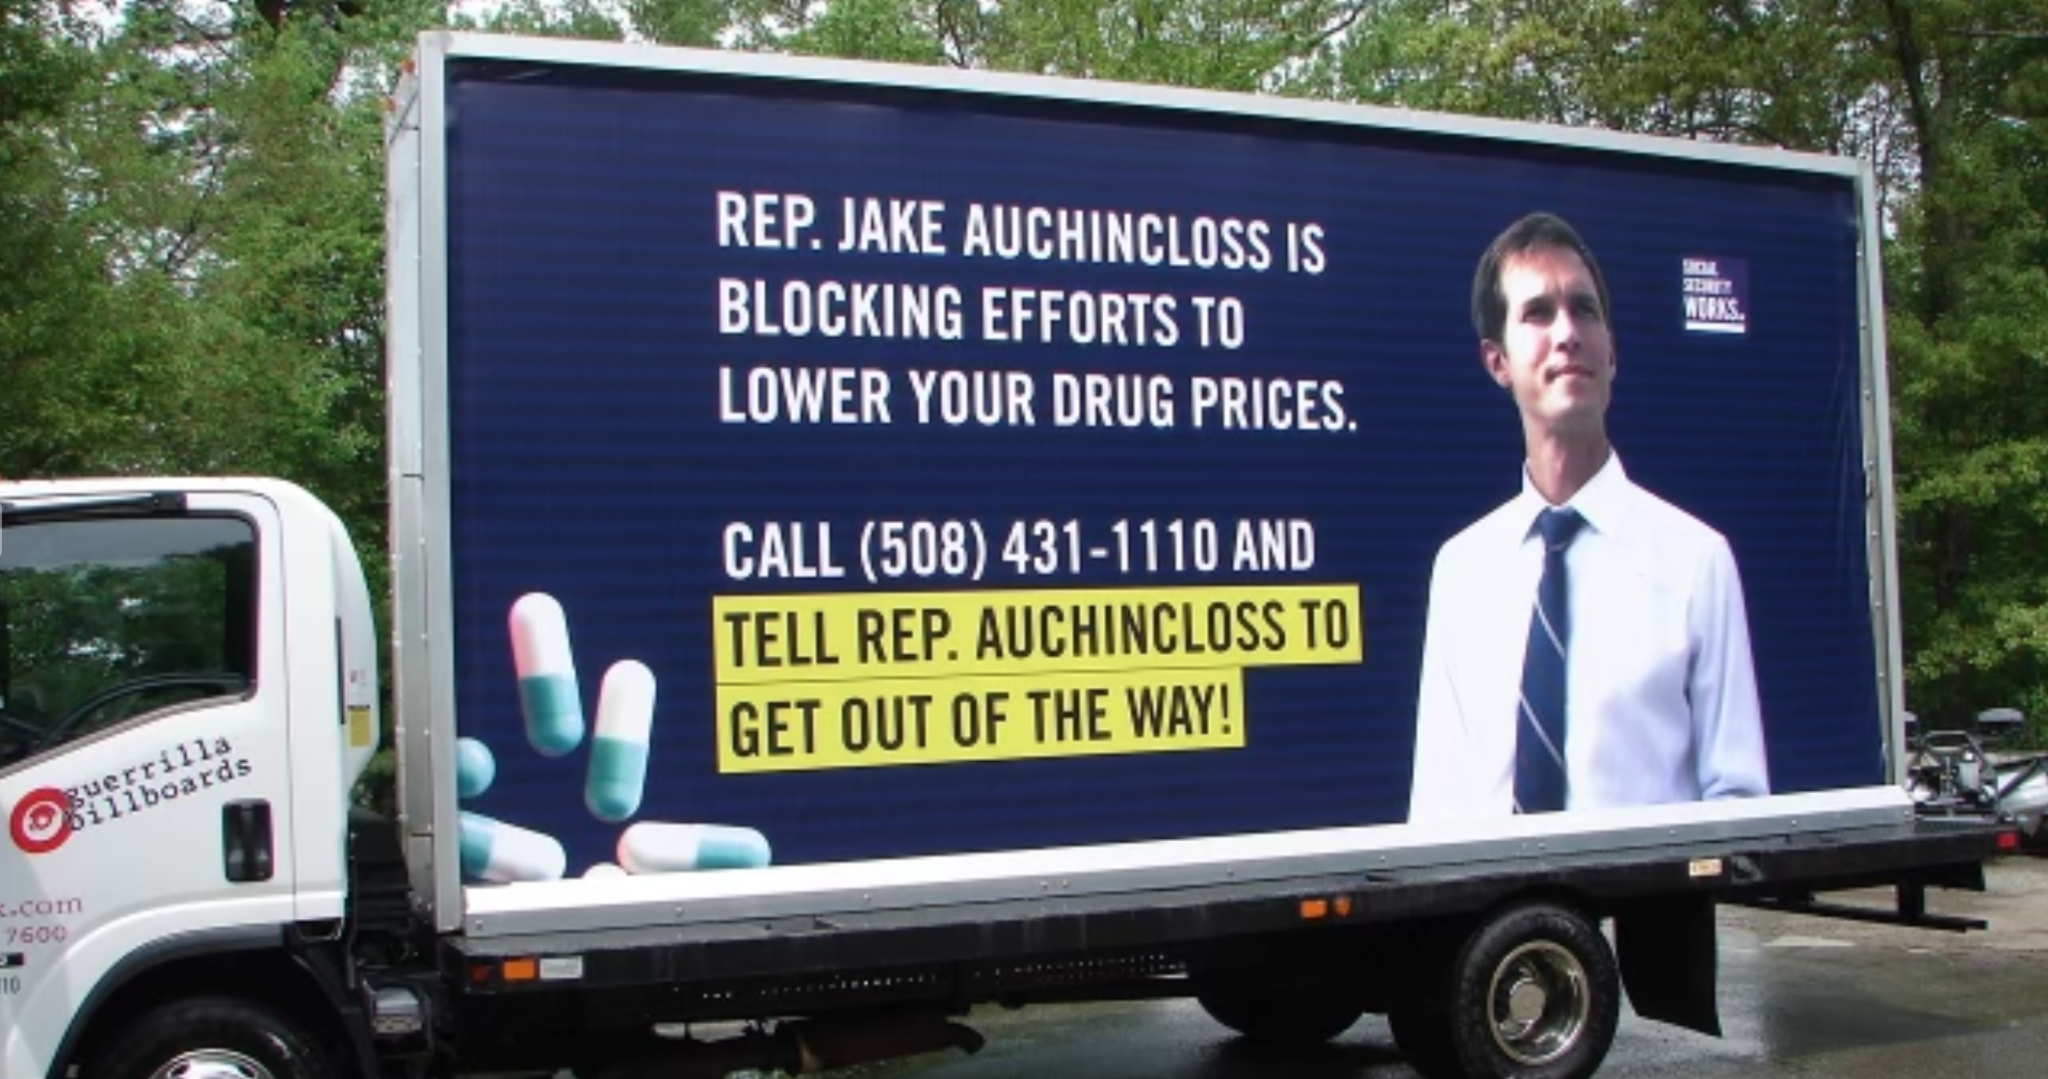 "After all we've been through in this pandemic, it's unconscionable that Rep. Auchincloss (D-Mass.) would rather do the bidding of Big Pharma corporate donors than lower prescription drug prices for working families," said Alexandra Rojas, executive director of Justice Democrats, on May 25, 2021. (Photo: Social Security Works)